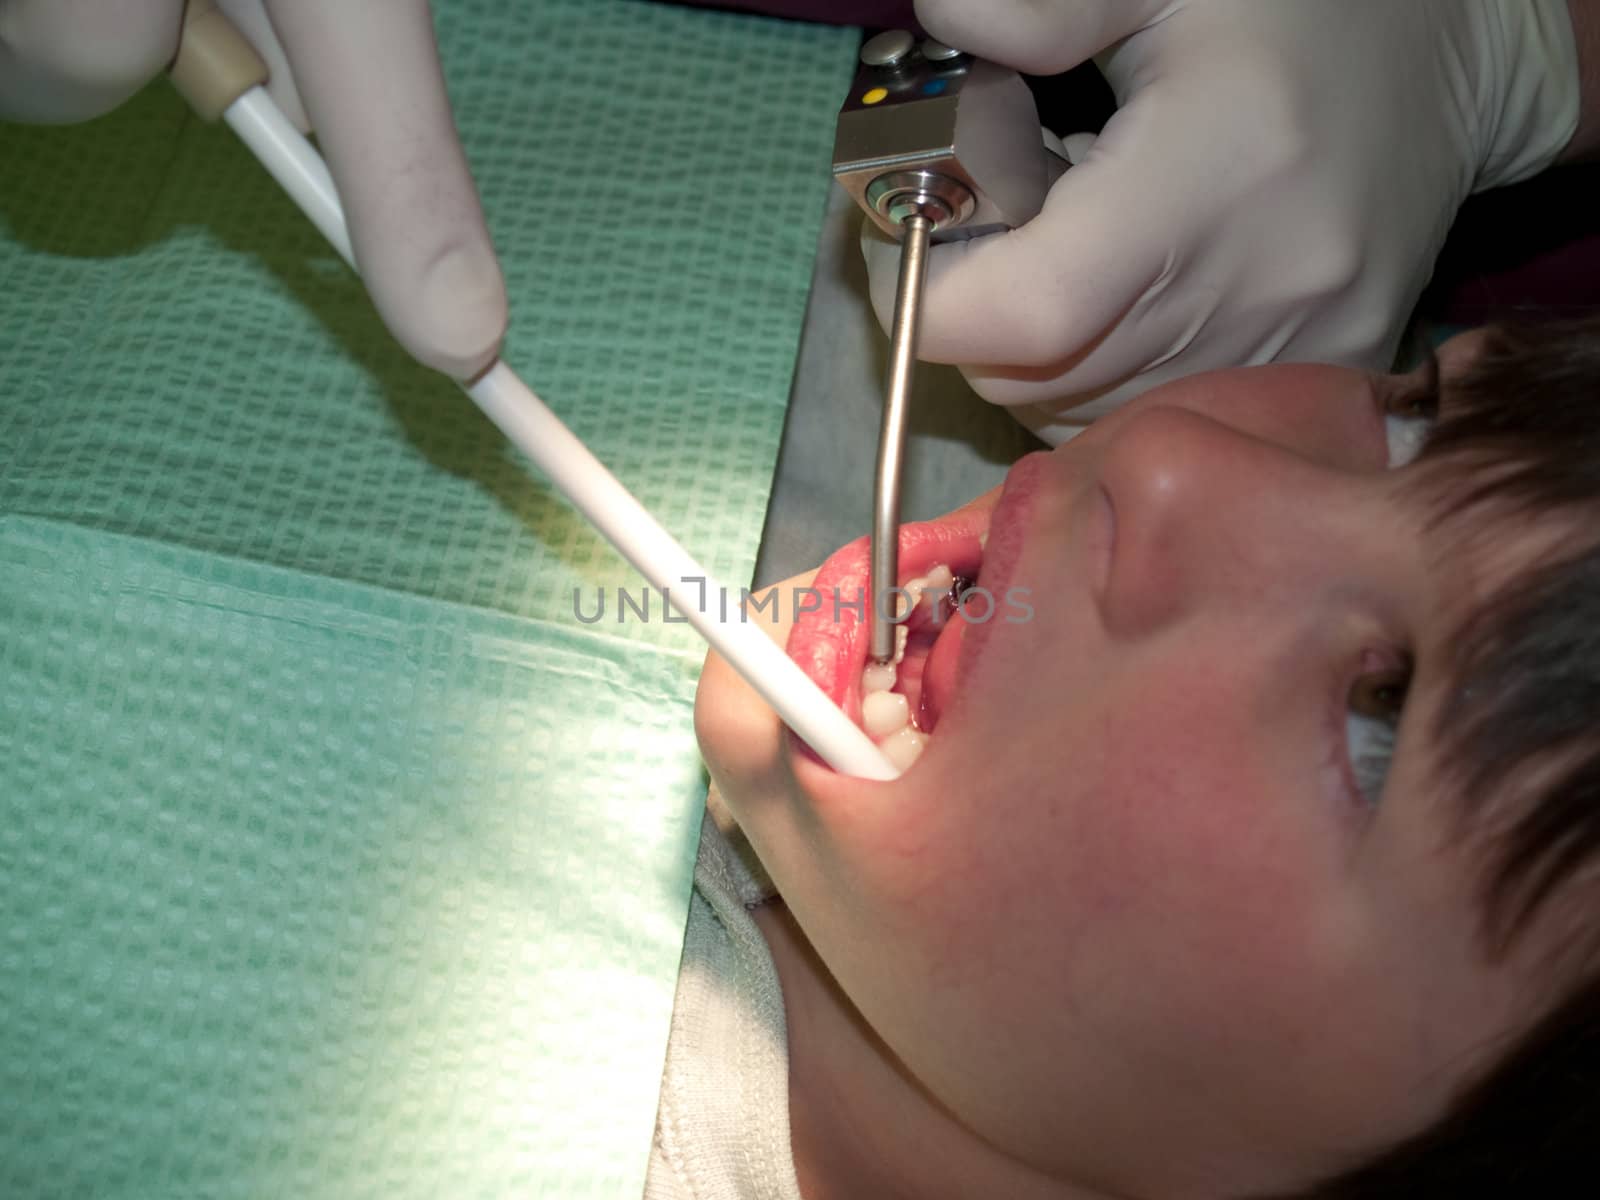 Hygienist working on a young boys mouth.